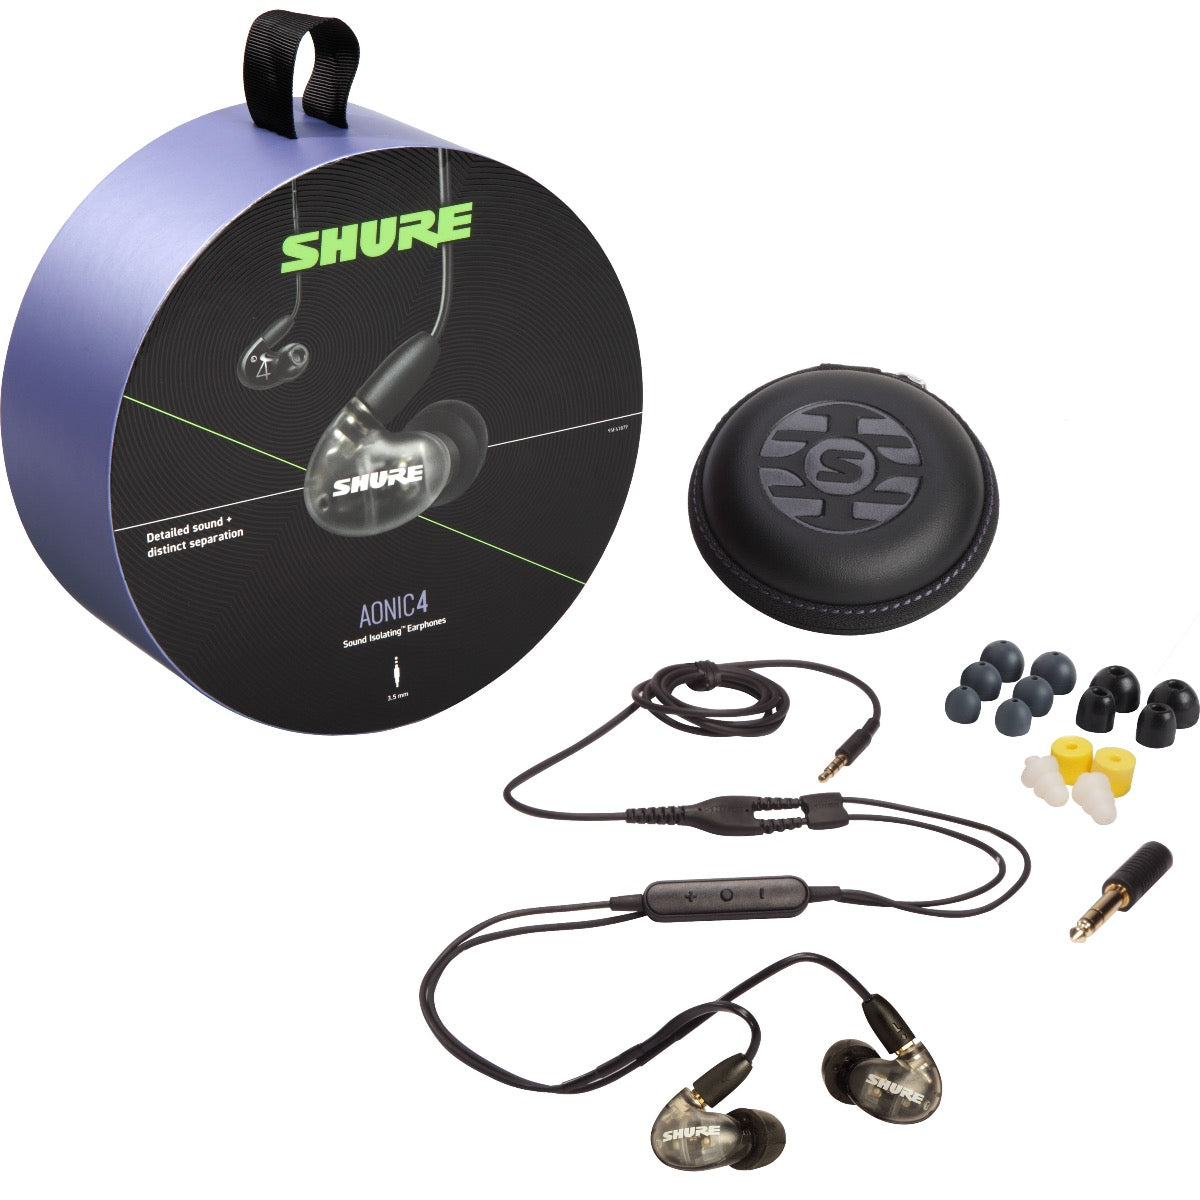 3/4 view of Shure AONIC 4 Sound Isolating Earphones - Clear/Black packaging and components showing front, top and left sides